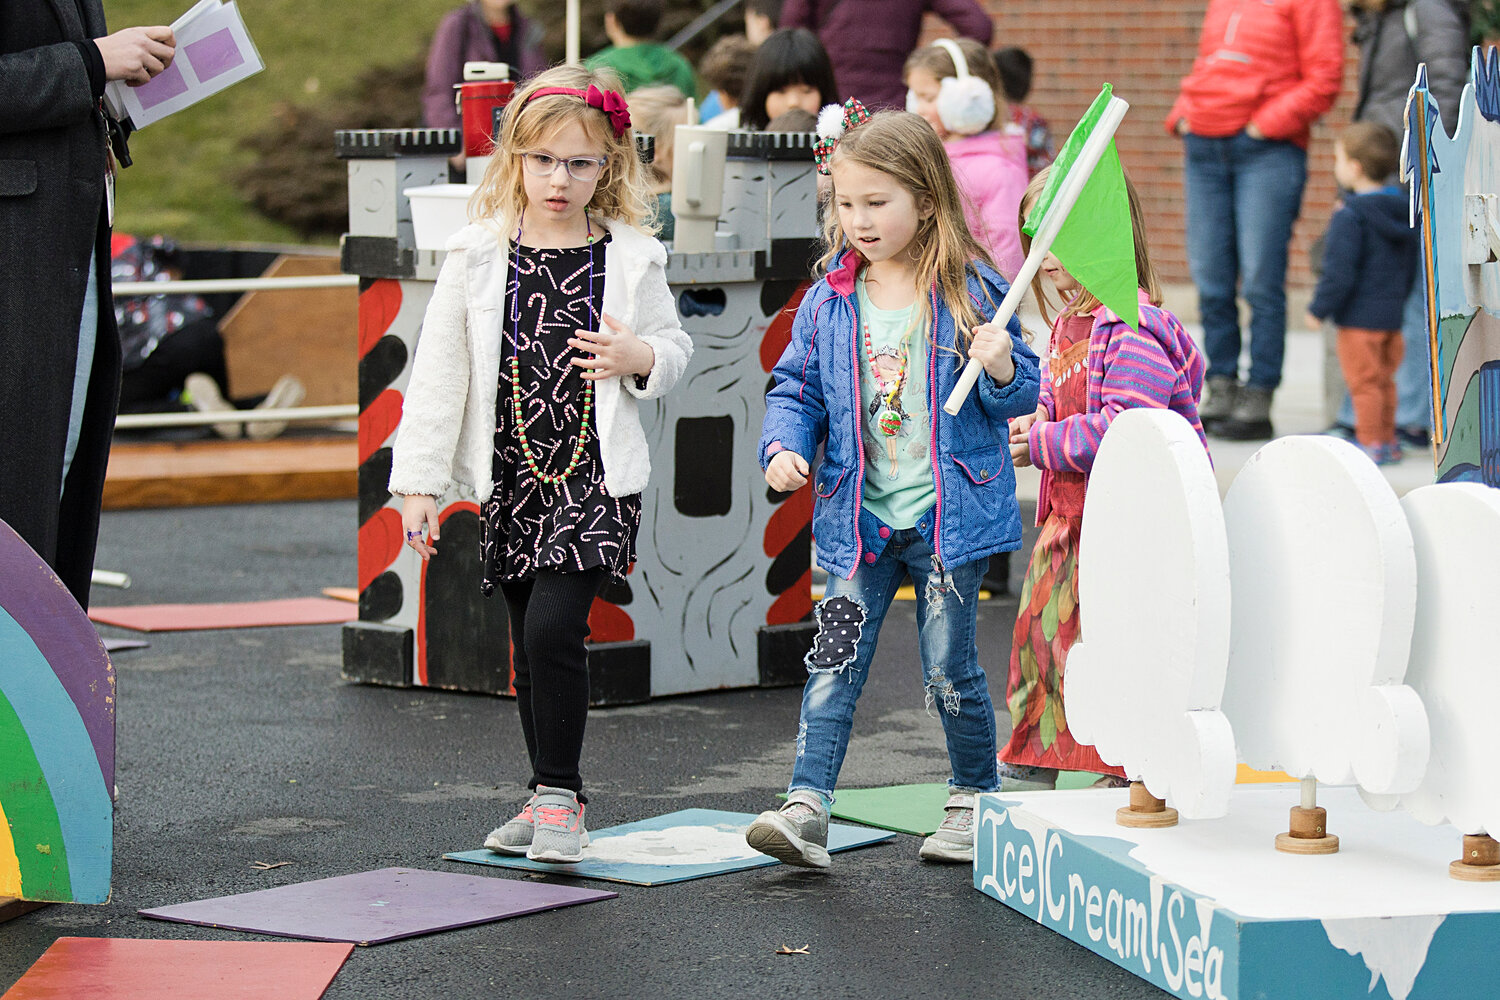 Madalyn Hadfield (left) and Madeline Miller take their turn while playing a life-sized game of Candy Land at the tree-lighting event on Saturday, Dec. 2.